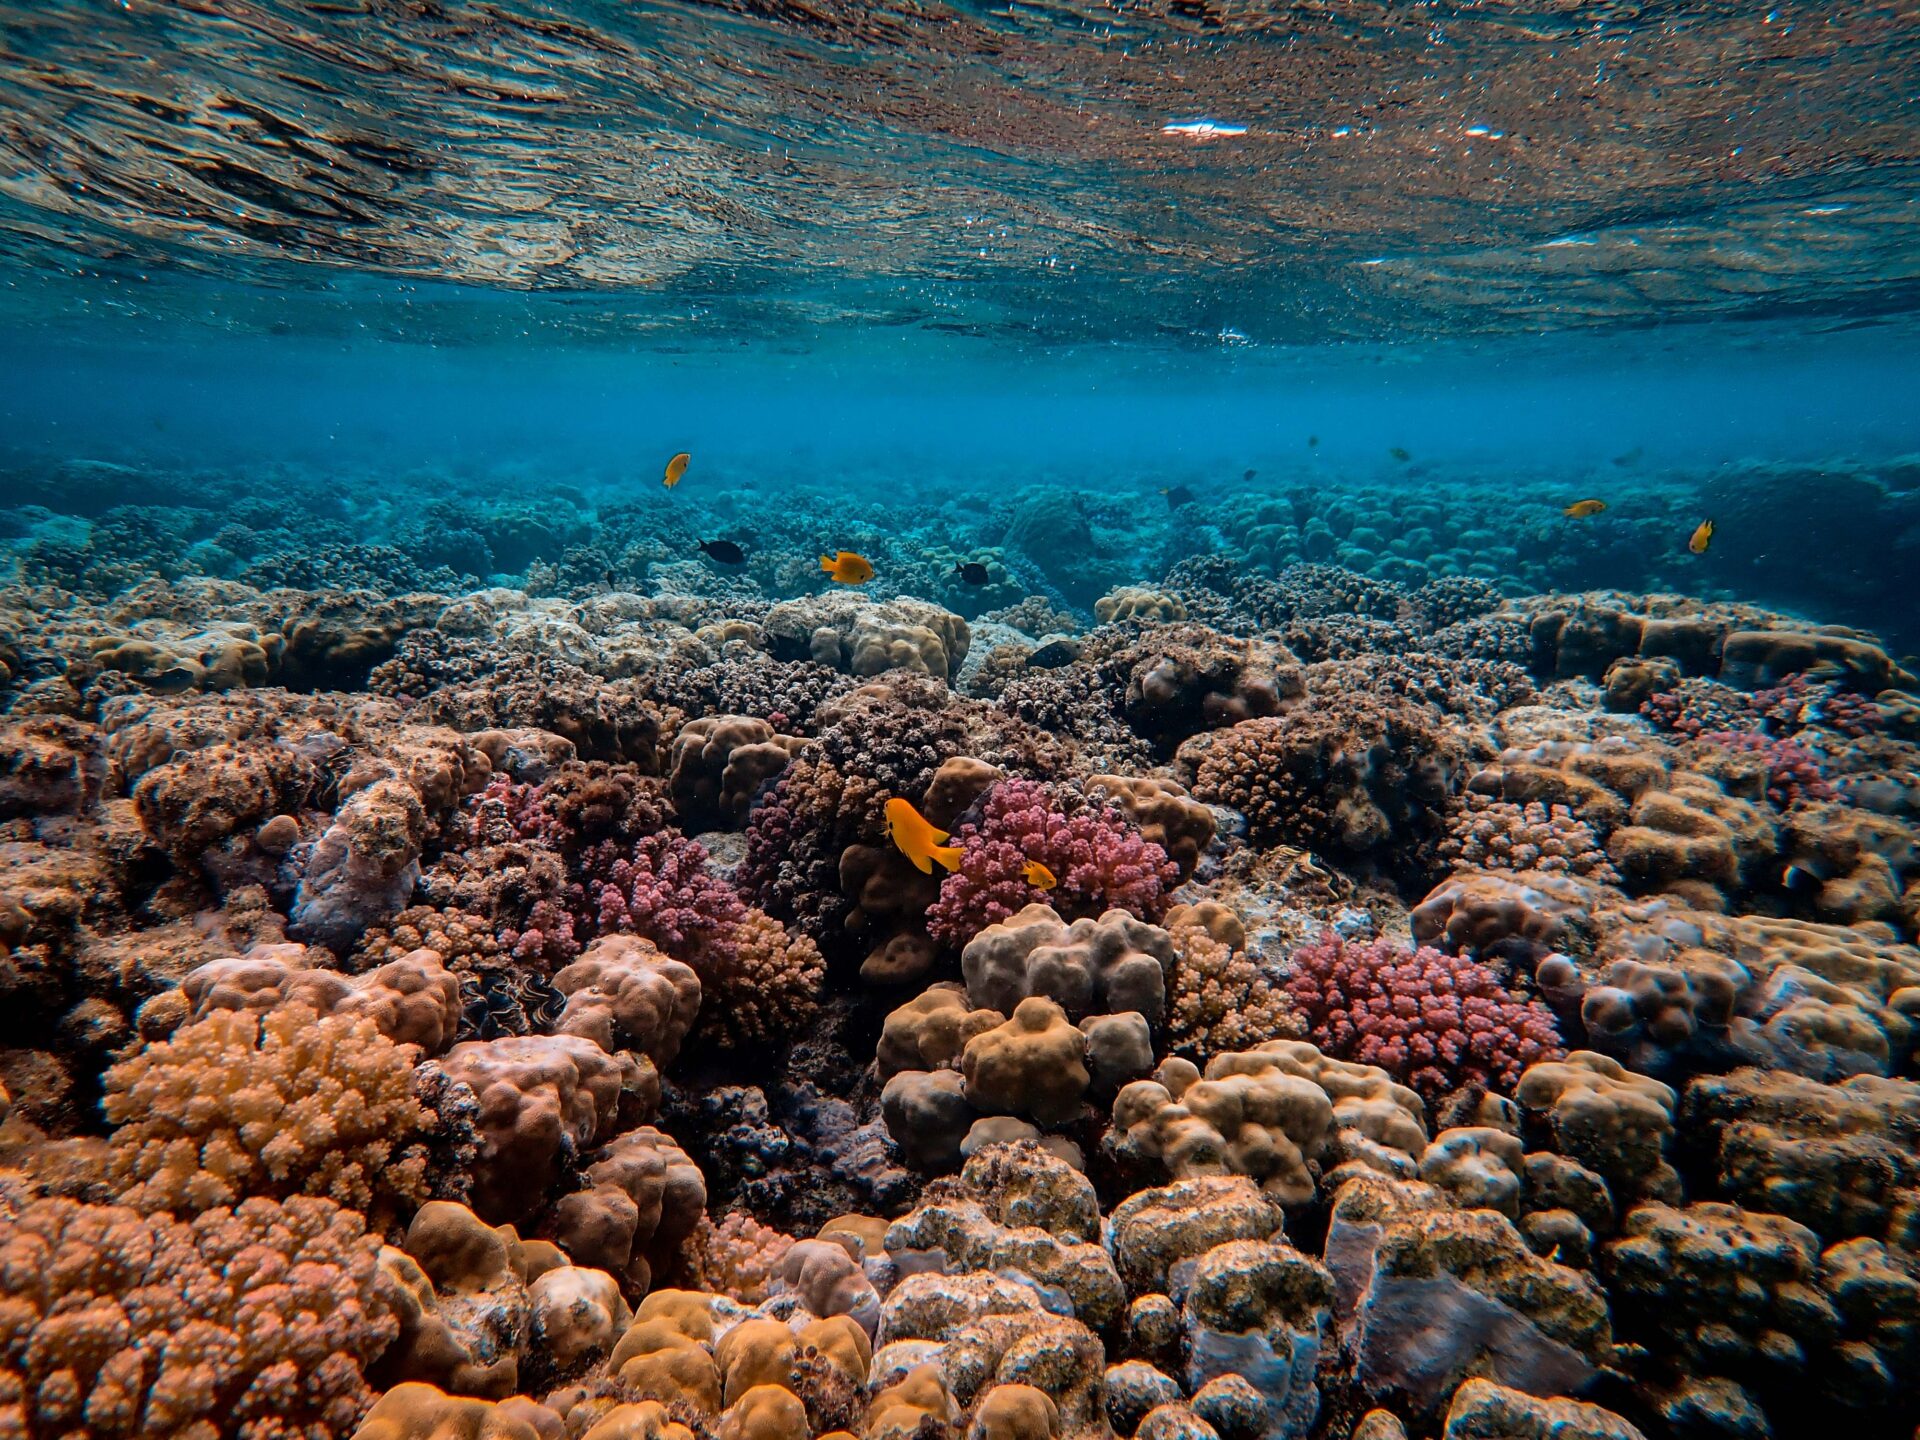 Coral reefs on Galapagos need replanting